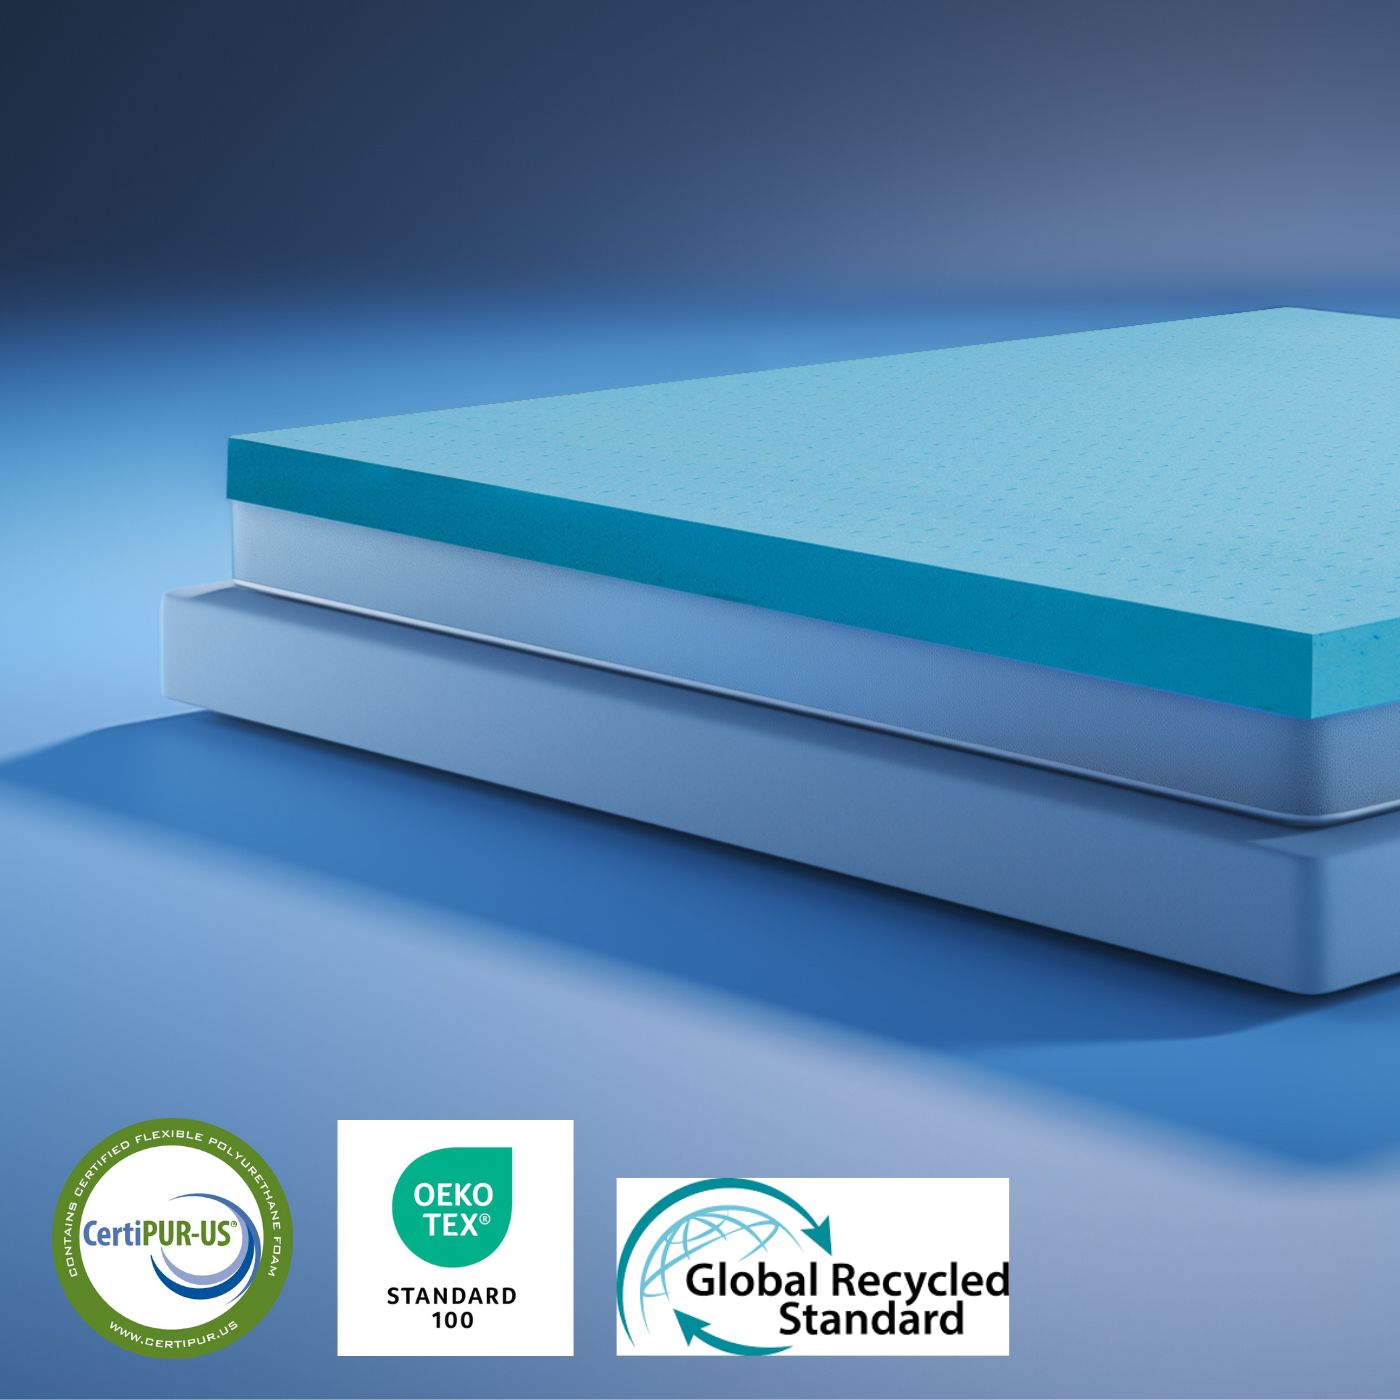 Mattress topper with CertiPUR-US, OEKO-TEX, and Global Recycled certifications.